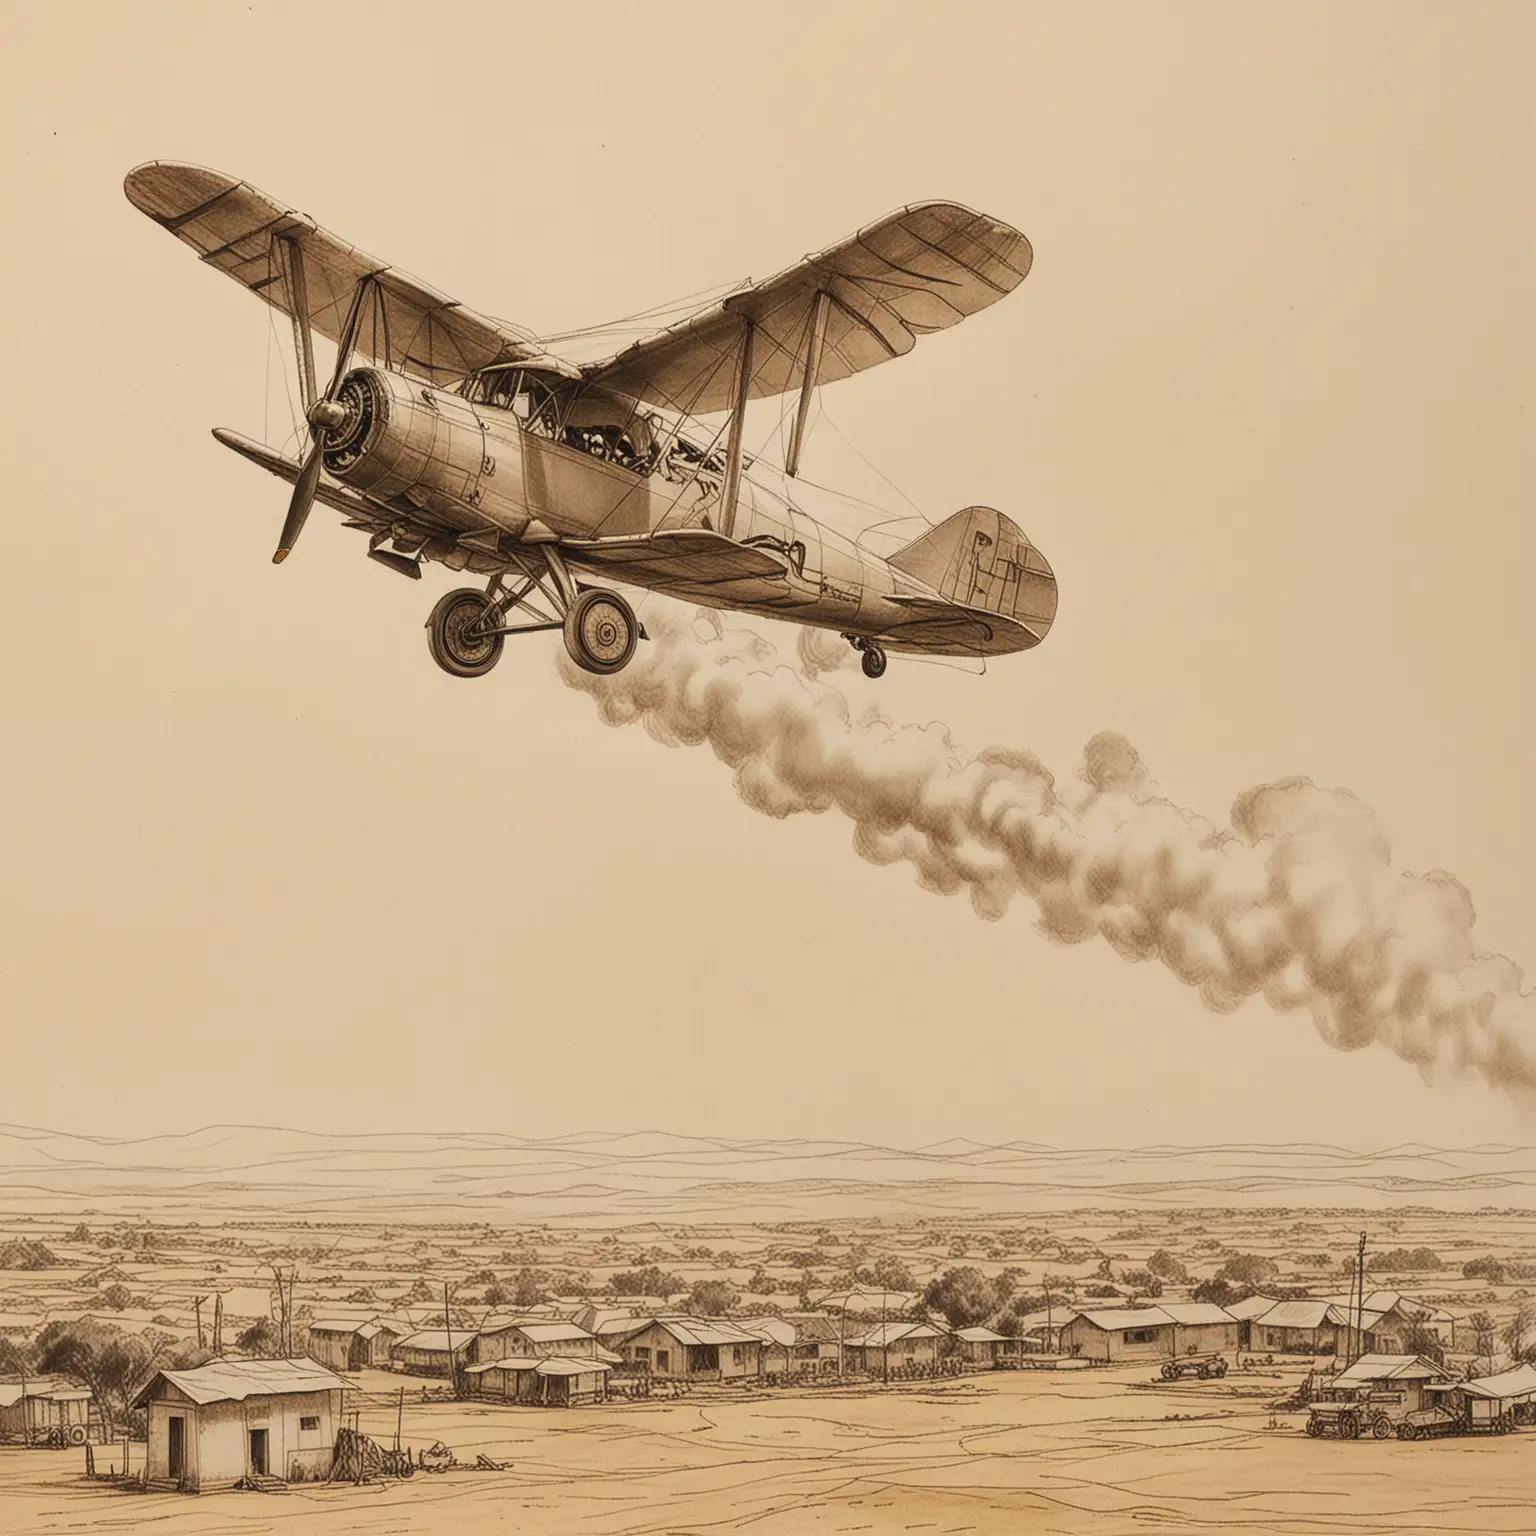 creat a storyboard scene a Potez 25 biplane liftoff from Ethiopia Adowa  filled in 1935, use pencils